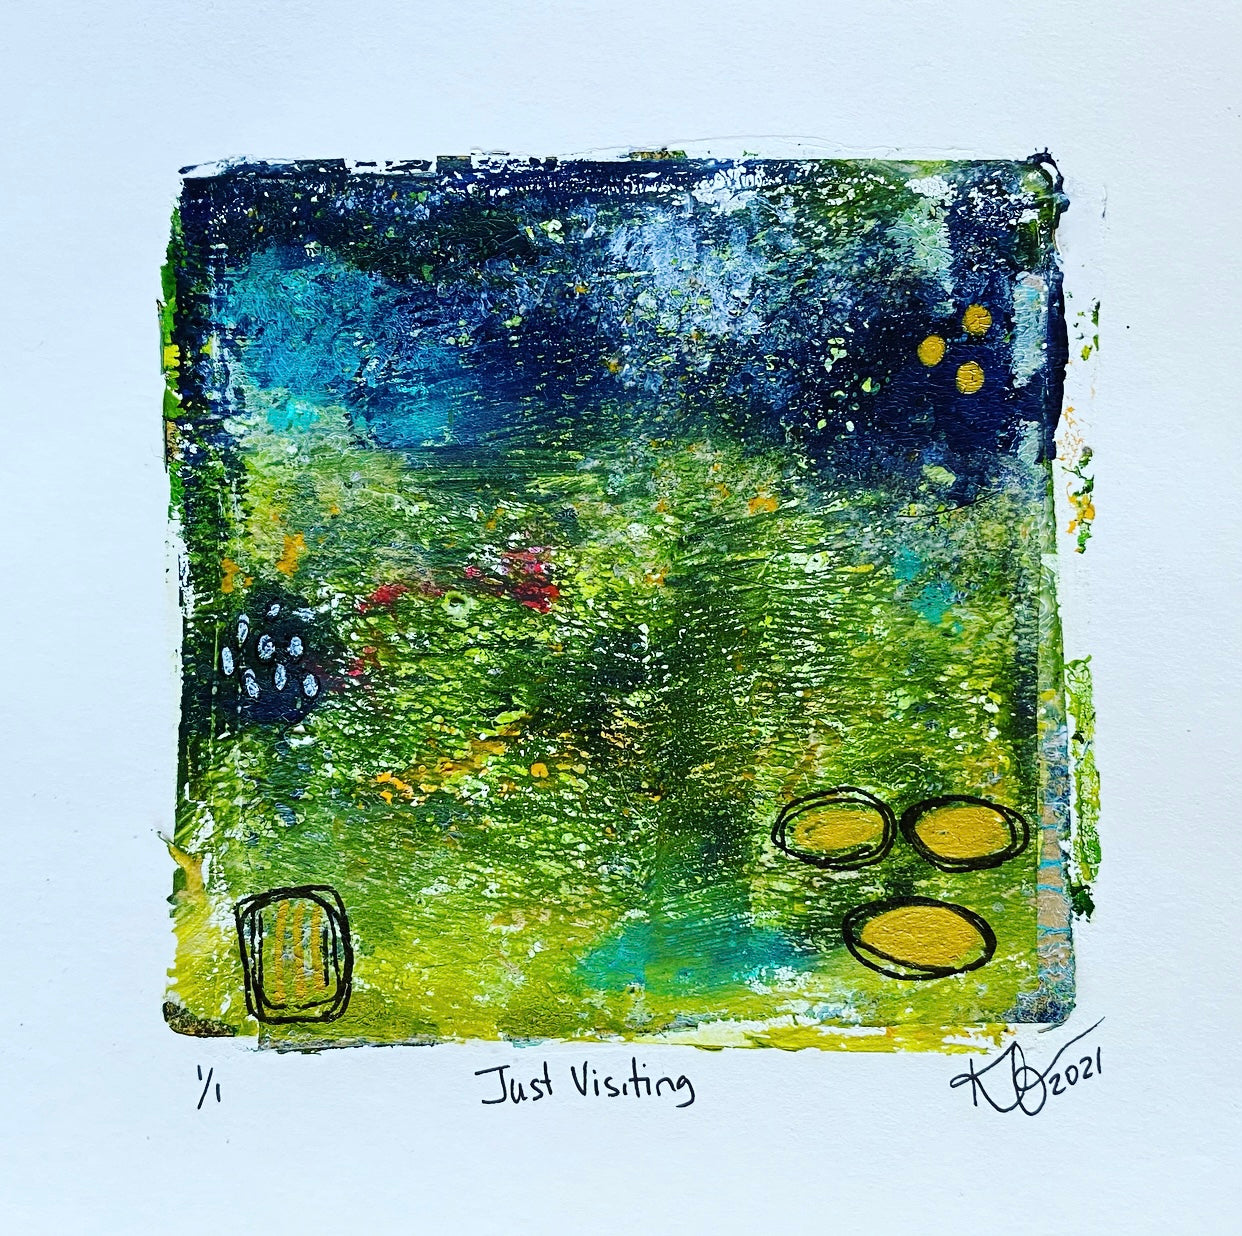 These $45 original piece - part of #everyonedeservesart is an amazing one!  Greens and goals blues blues this reminds me of stumbling upon golden coins by a beautiful secret pond in the middle of a lush, enchanted forest.